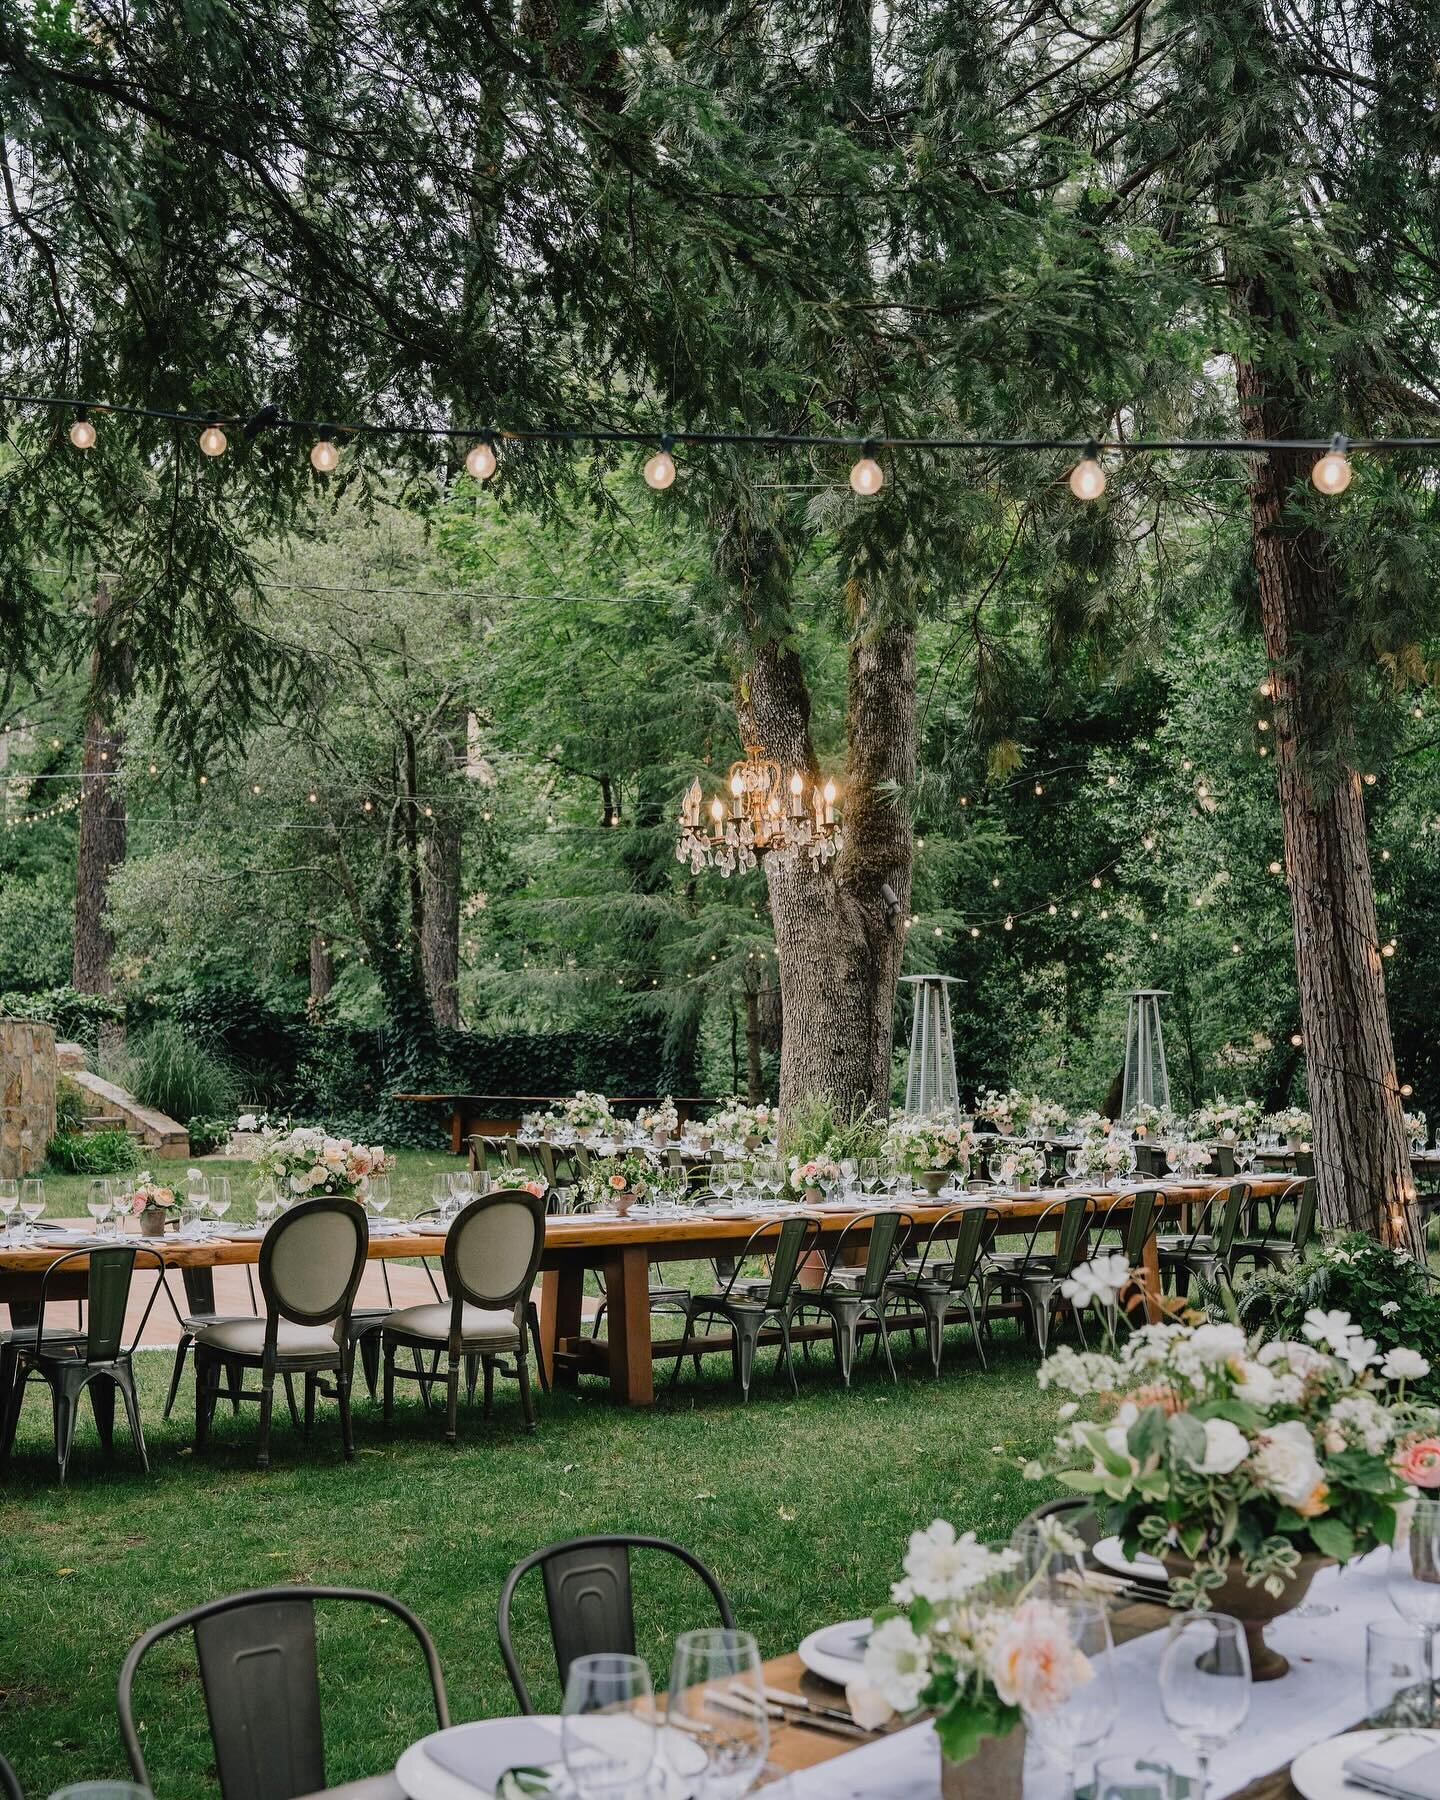 Secret garden in Calistoga 💫
Planning/Design: @cmg_events | @tricia_cmgevents
Venue: #pythianhousecottage
Catering: @cuvee_events
Photography/Videography: @animalhousevisuals
Entertainment: @entouragetheband
Florals: @florali
Beauty: @oliviagarvinma